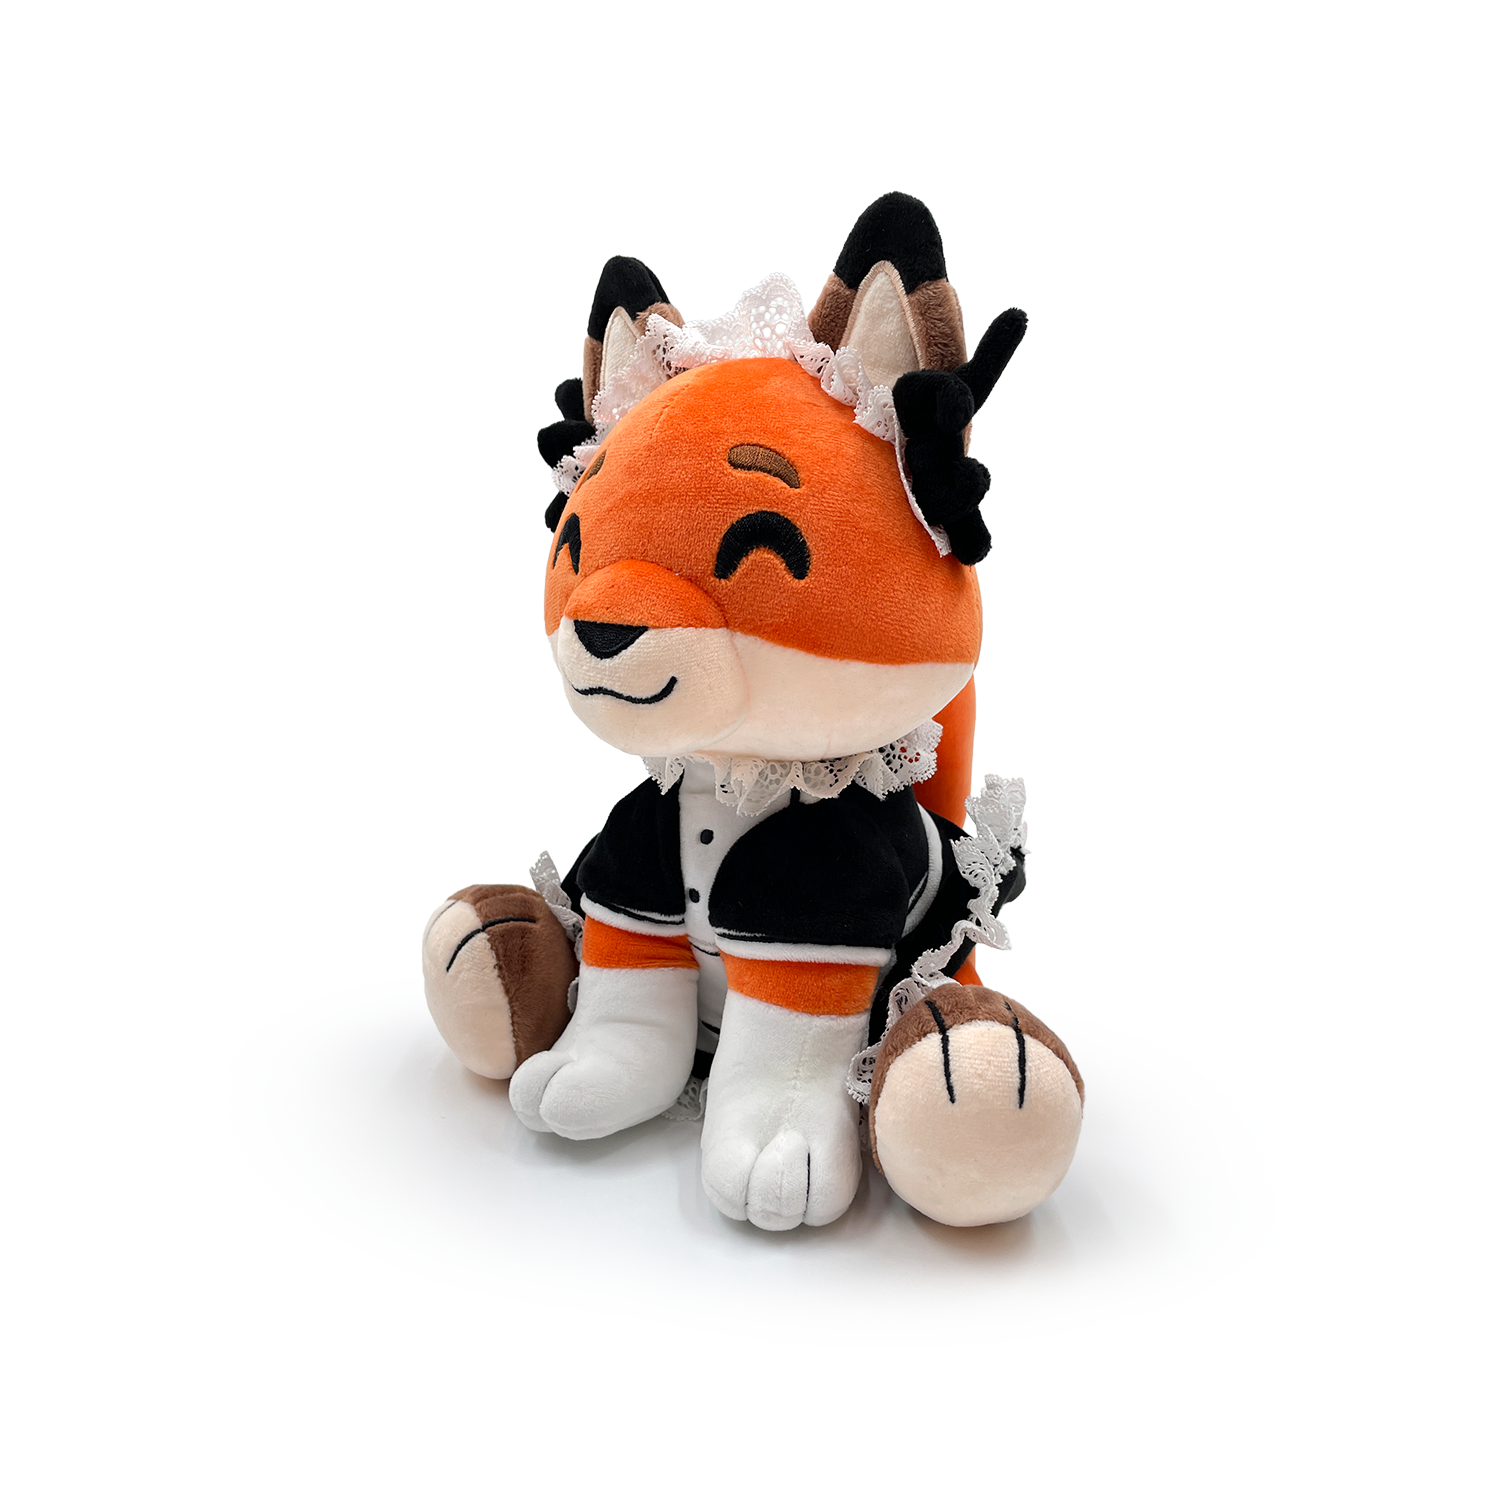 Youtooz Fundy Sit Plush, 9 Inches, Dreamsmp Minecraft plsuh, comes with box